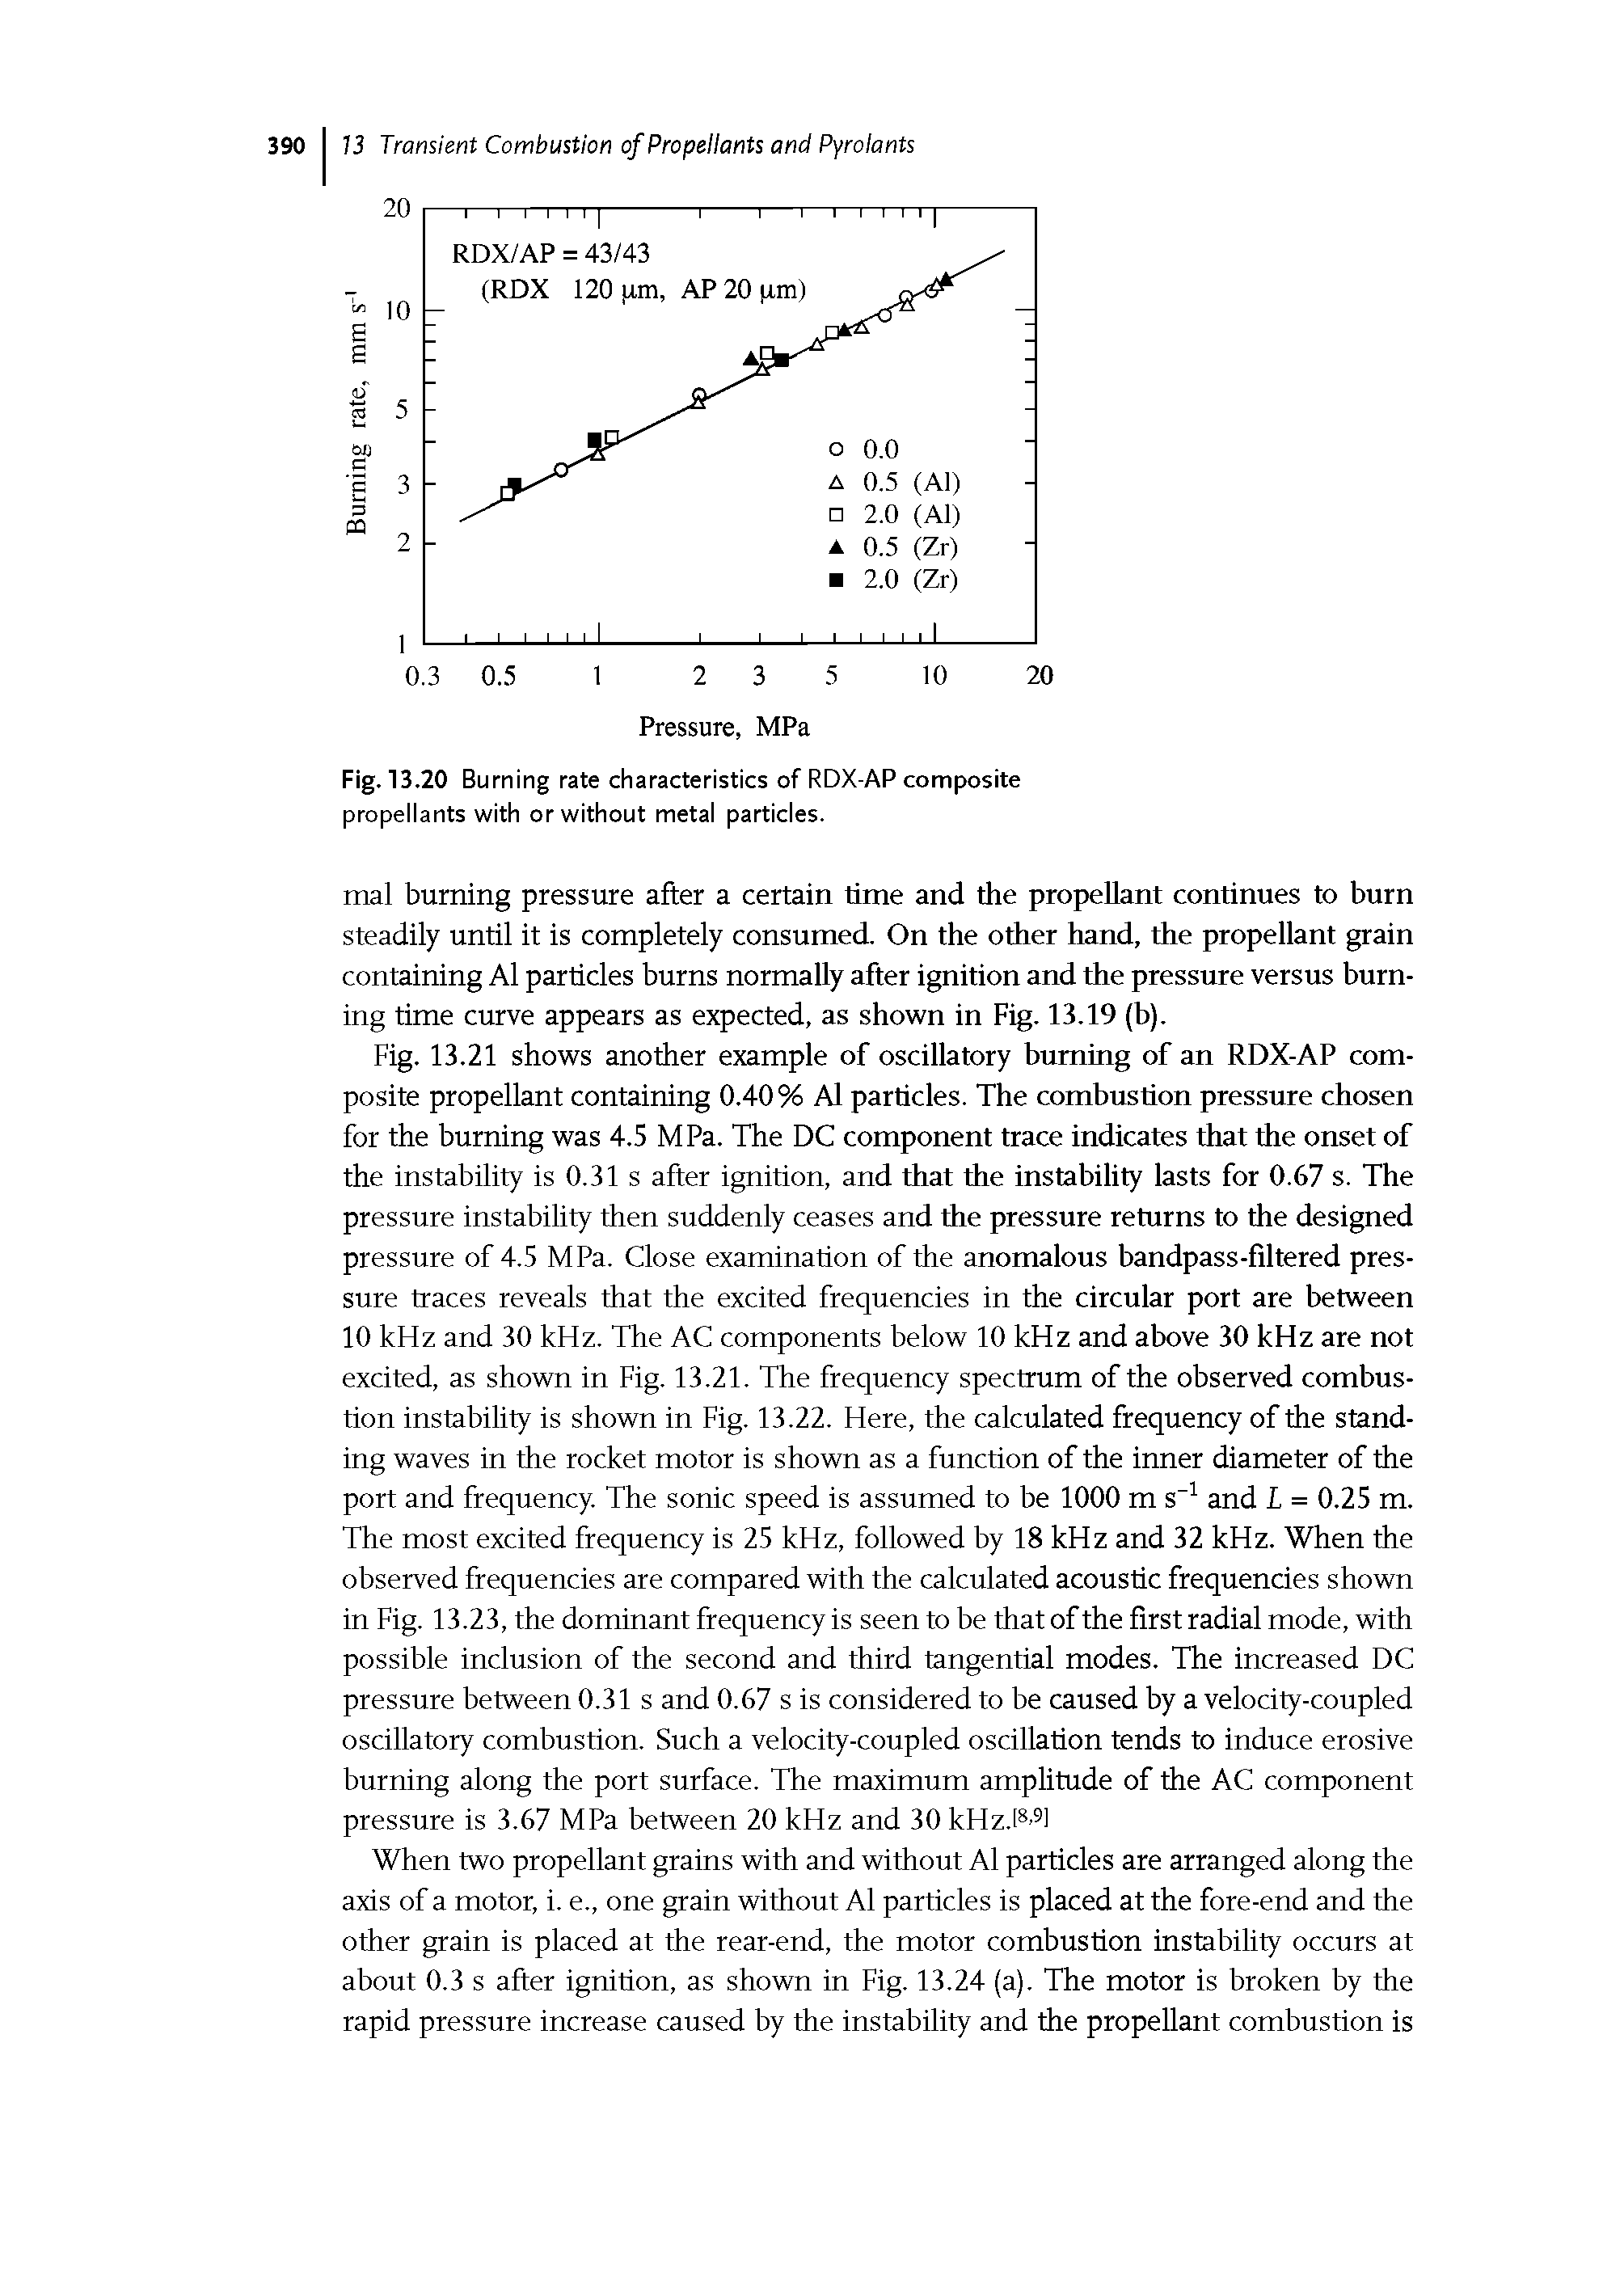 Fig. 13.21 shows another example of oscillatory burning of an RDX-AP composite propellant containing 0.40% A1 particles. The combustion pressure chosen for the burning was 4.5 MPa. The DC component trace indicates that the onset of the instability is 0.31 s after ignition, and that the instability lasts for 0.67 s. The pressure instability then suddenly ceases and the pressure returns to the designed pressure of 4.5 MPa. Close examination of the anomalous bandpass-filtered pressure traces reveals that the excited frequencies in the circular port are between 10 kHz and 30 kHz. The AC components below 10 kHz and above 30 kHz are not excited, as shown in Fig. 13.21. The frequency spectrum of the observed combustion instability is shown in Fig. 13.22. Here, the calculated frequency of the standing waves in the rocket motor is shown as a function of the inner diameter of the port and frequency. The sonic speed is assumed to be 1000 m s and I = 0.25 m. The most excited frequency is 25 kHz, followed by 18 kHz and 32 kHz. When the observed frequencies are compared with the calculated acoustic frequencies shown in Fig. 13.23, the dominant frequency is seen to be that of the first radial mode, with possible inclusion of the second and third tangential modes. The increased DC pressure between 0.31 s and 0.67 s is considered to be caused by a velocity-coupled oscillatory combustion. Such a velocity-coupled oscillation tends to induce erosive burning along the port surface. The maximum amplitude of the AC component pressure is 3.67 MPa between 20 kHz and 30 kHz. - ...